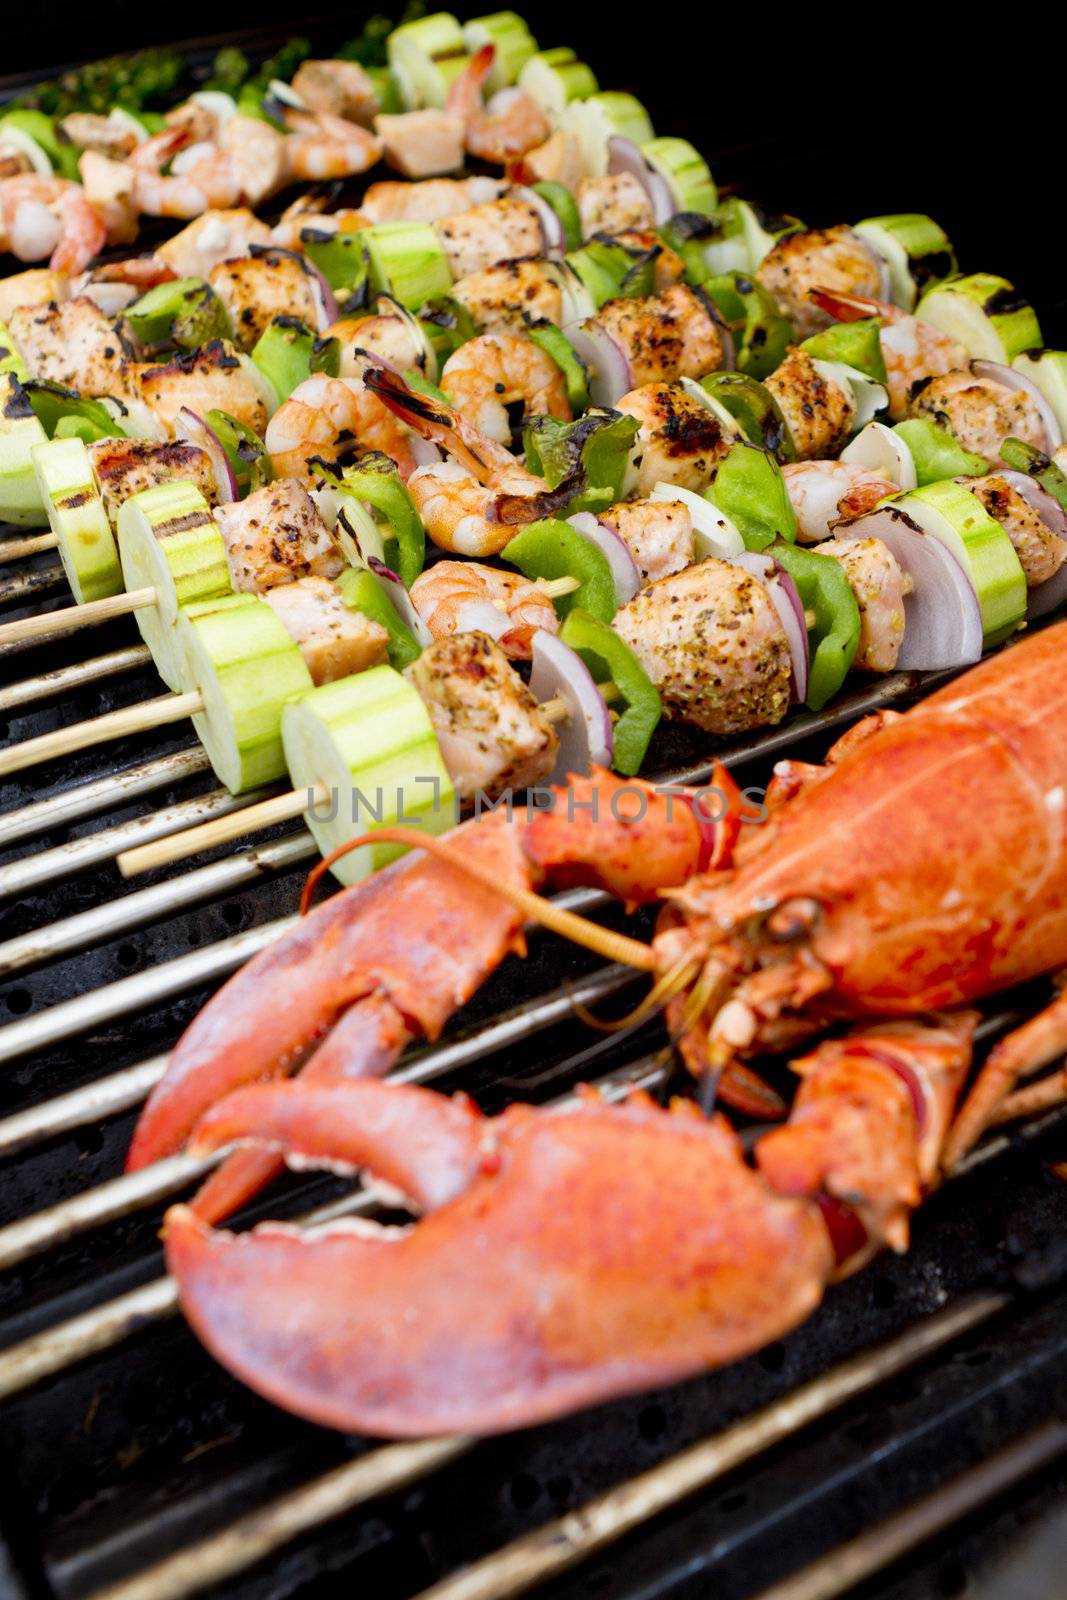 Salmon Skewers and Lobster BBQ by coskun